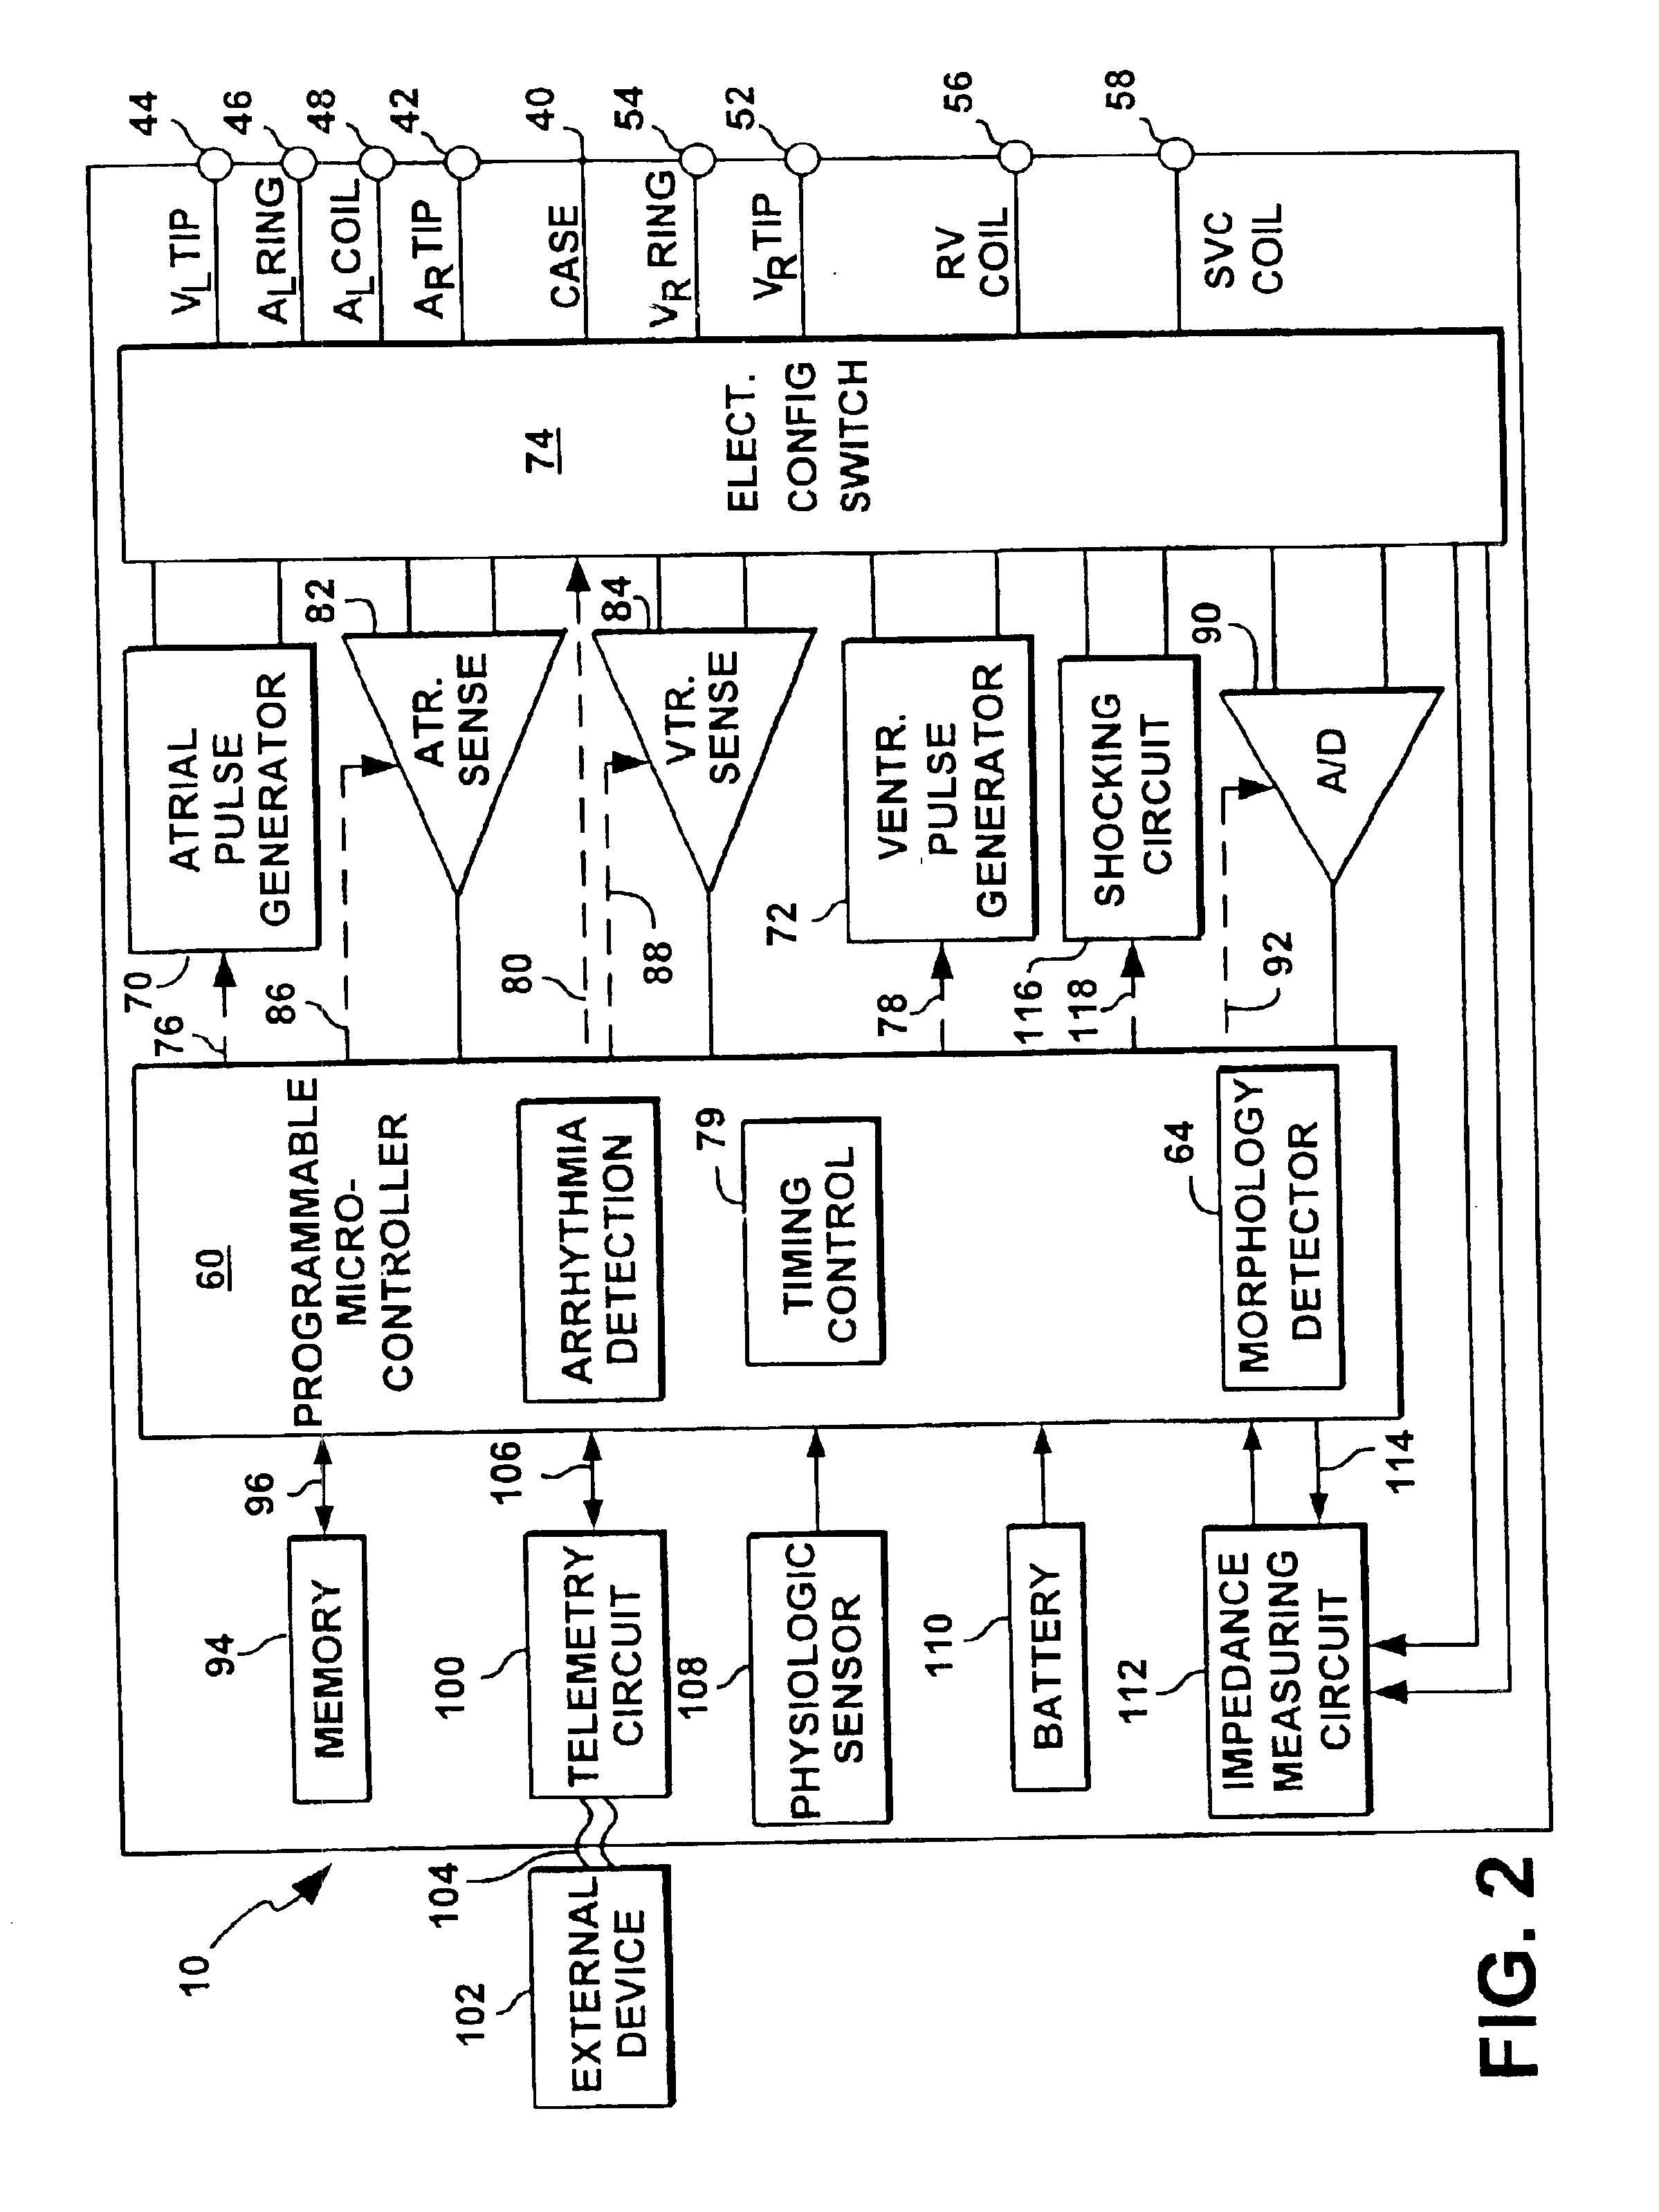 System and method of identifying fusion for dual-chamber automatic capture stimulation device